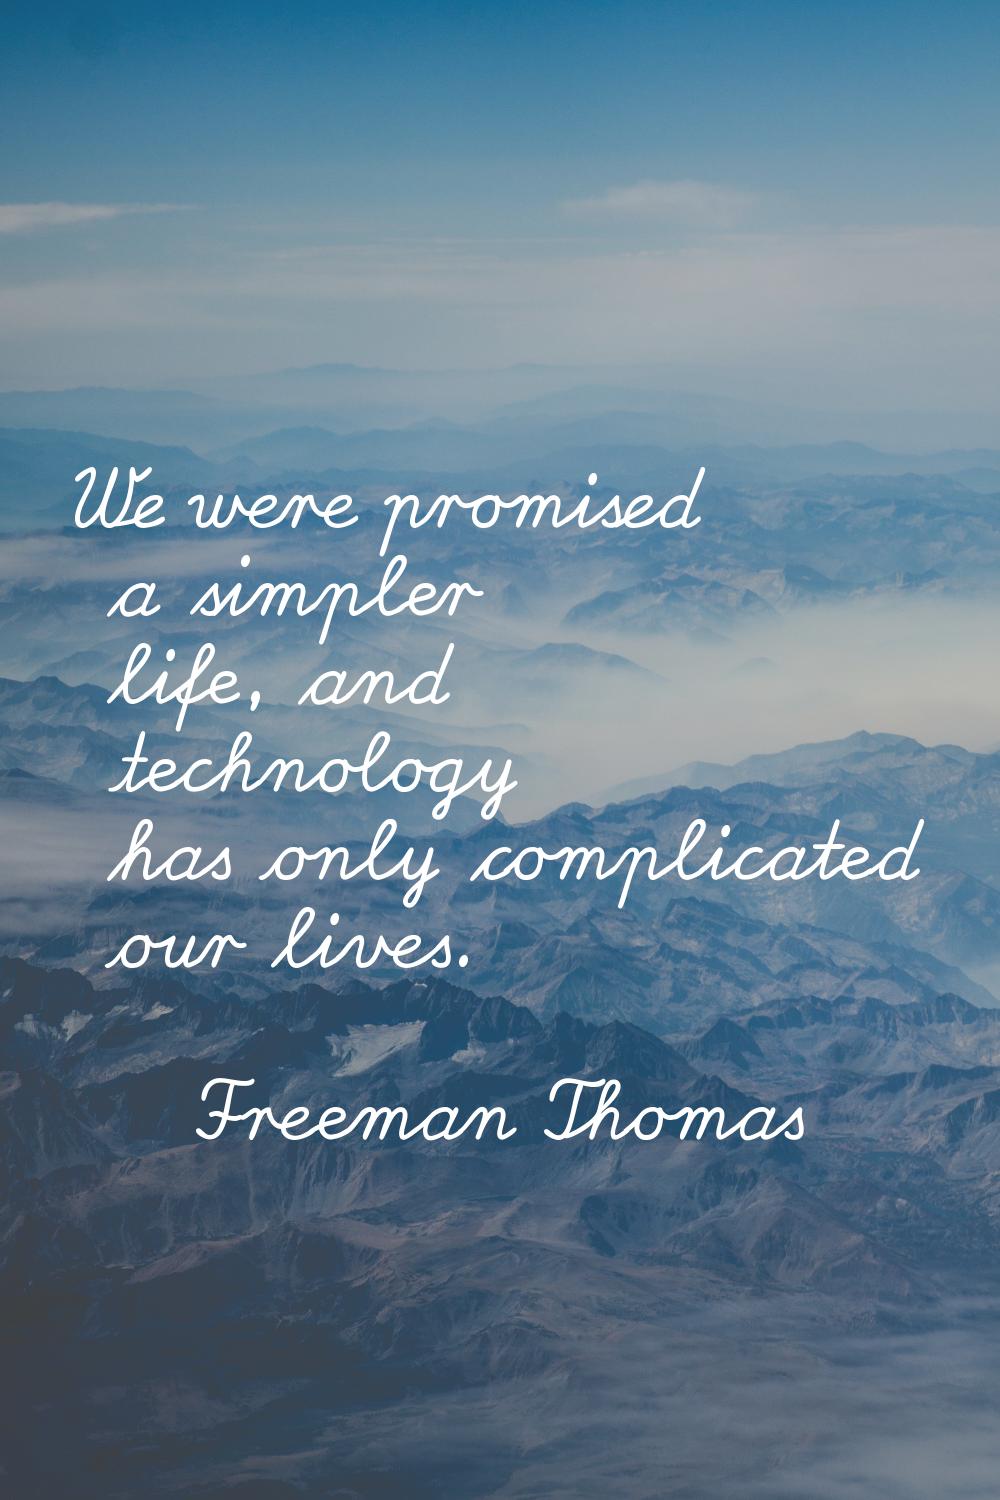 We were promised a simpler life, and technology has only complicated our lives.